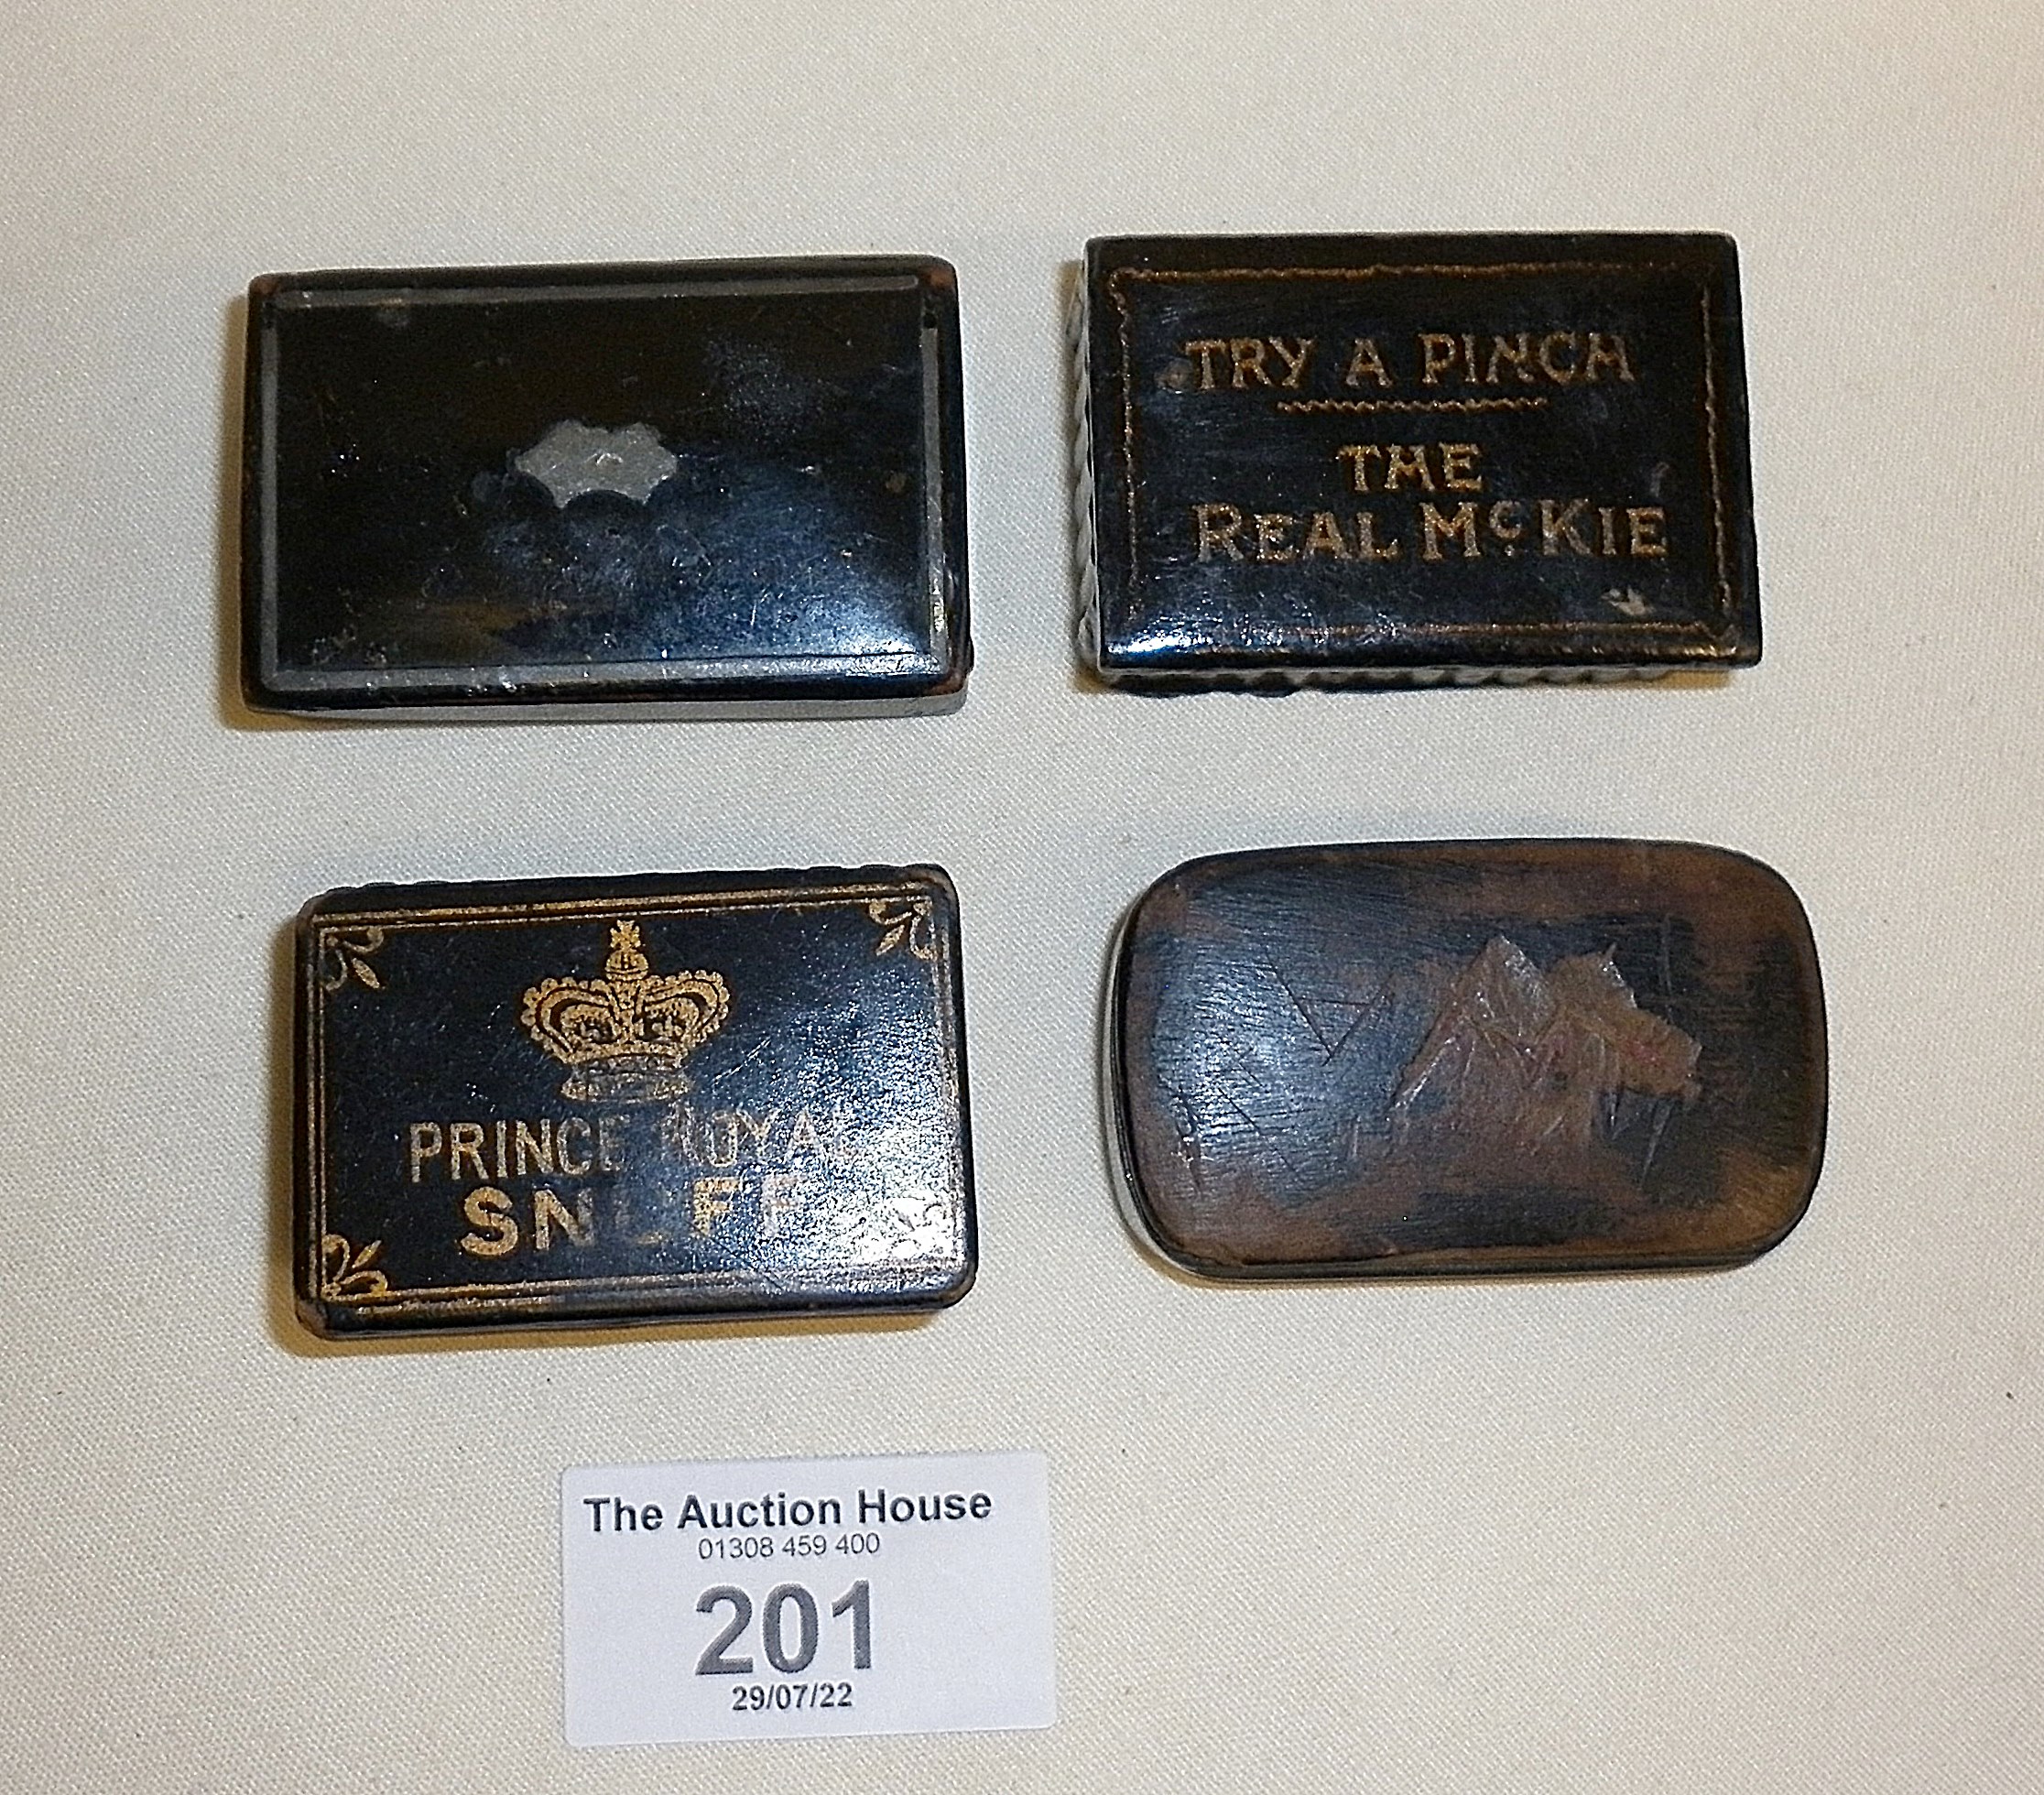 Four various antique lacquered papier mache snuff boxes, one reading "Prince Royal Snuff" and